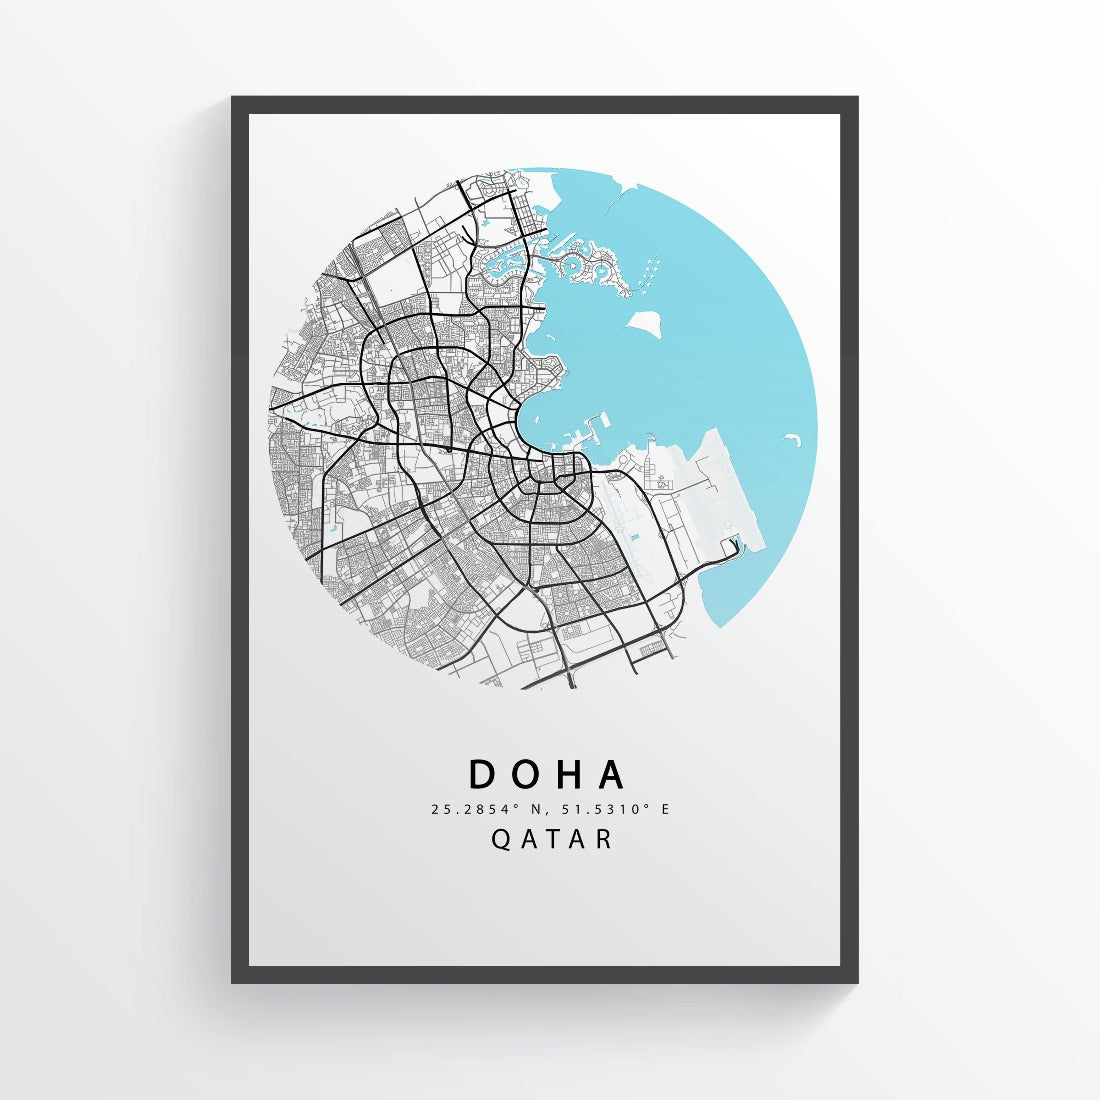 Discover a city with a new perspective. Wander the streets of Doha with this intricately designed map print. Depicting the cityscape in stunning detail, this print is a must-have for any traveler. Frame this print and hang it on your wall as a daily reminder of your travels to Doha.